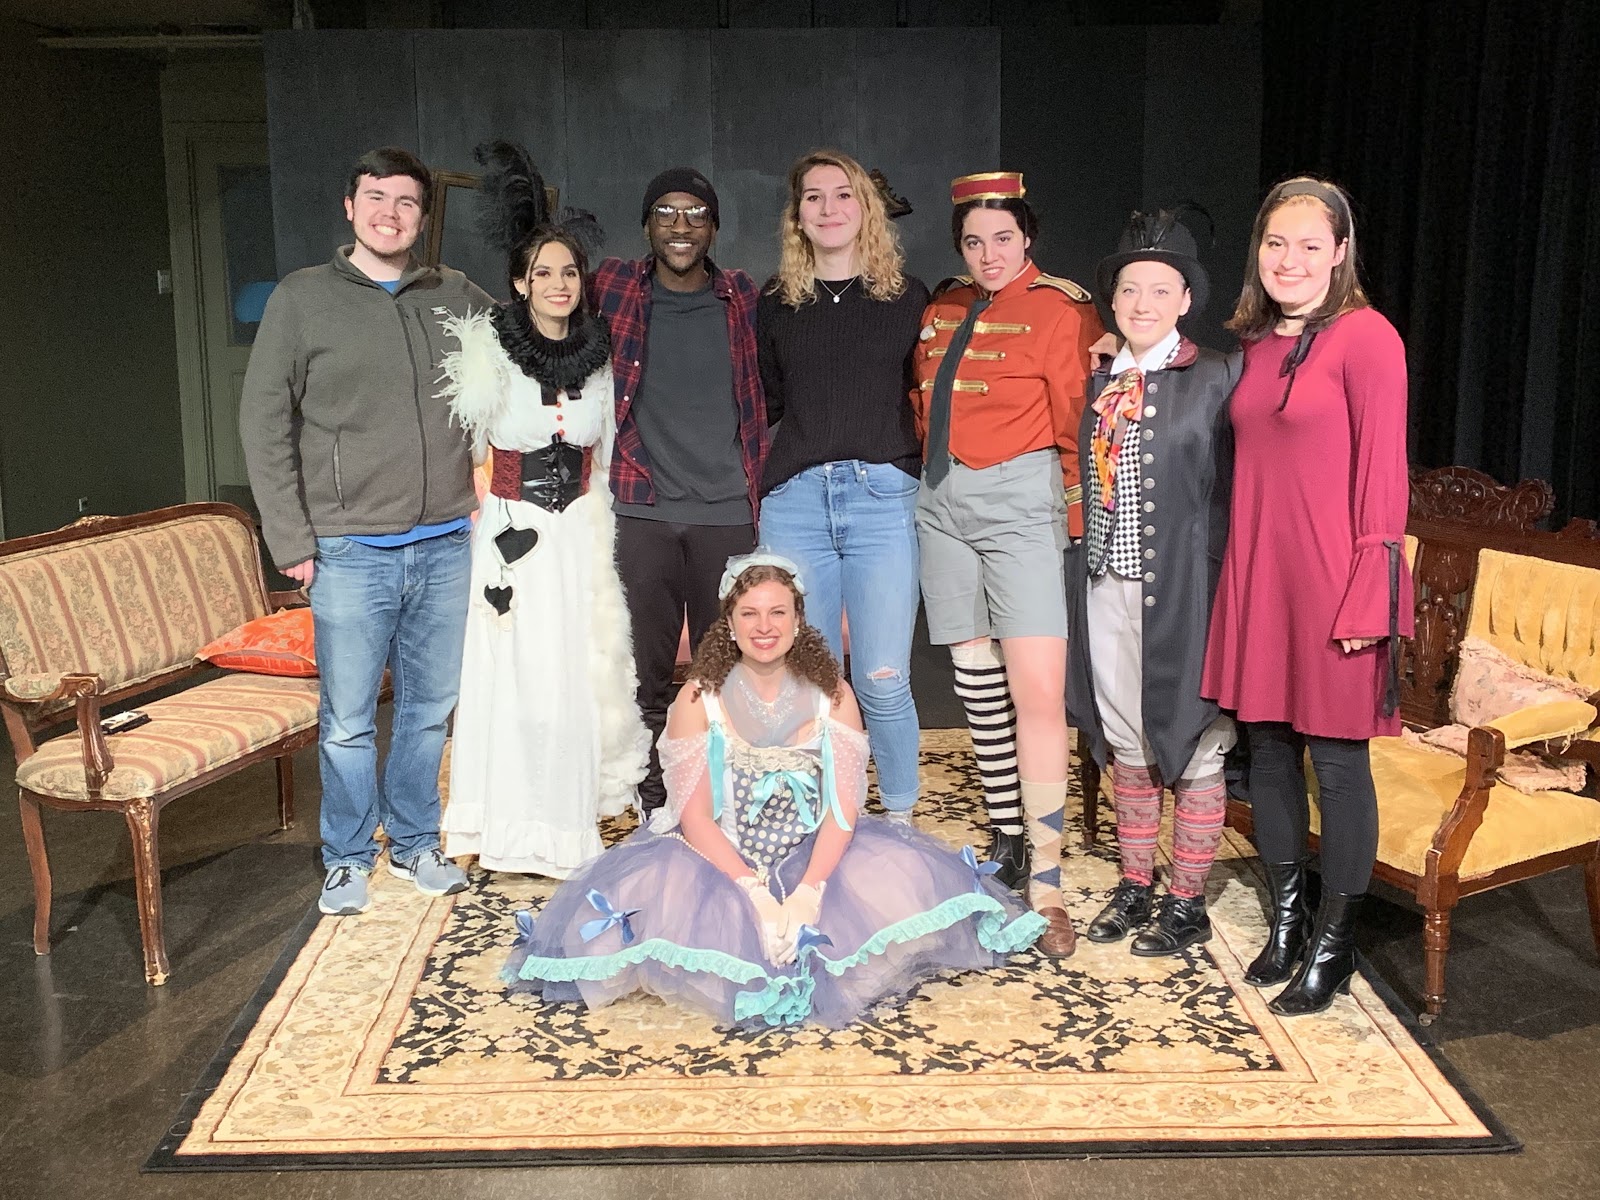 Declan Rockett ‘20, Scarlett Diaz-Power ‘20, me, Morgan Grant ‘20, Mia Barbuto ‘22, Becca Collins ‘21, Carly Sponzo ‘21 and Sonia Joffe ‘19 pose in their costumes on the set of No Exit